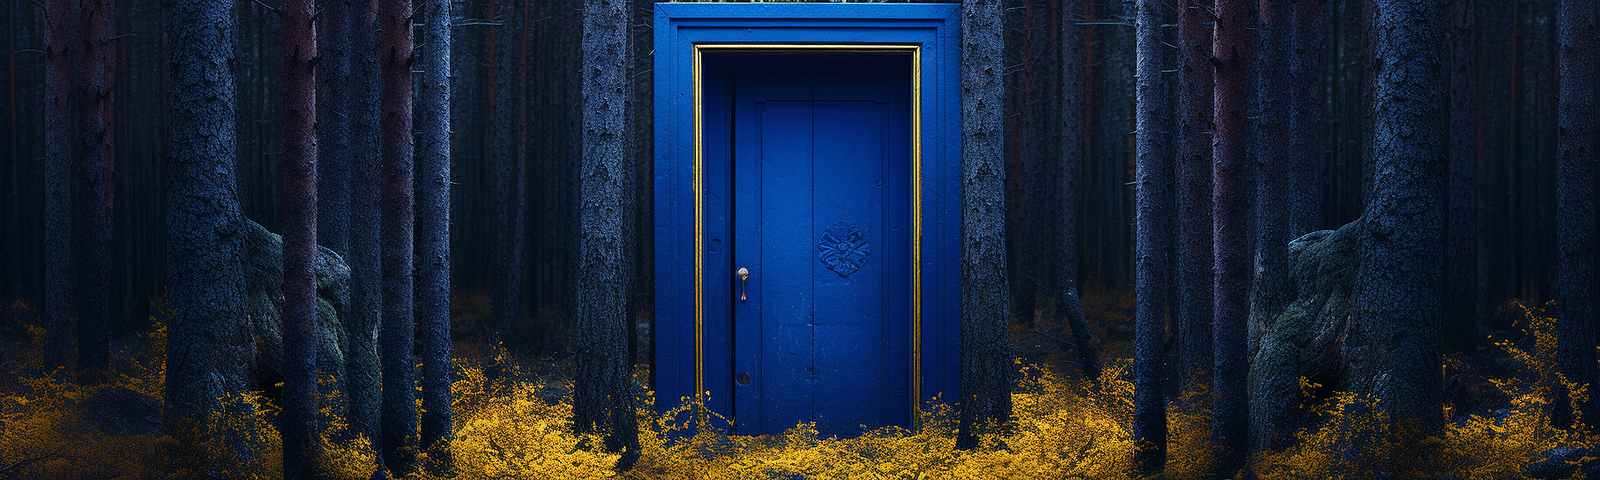 A blue door with a golden trim, alone in a dark wood.